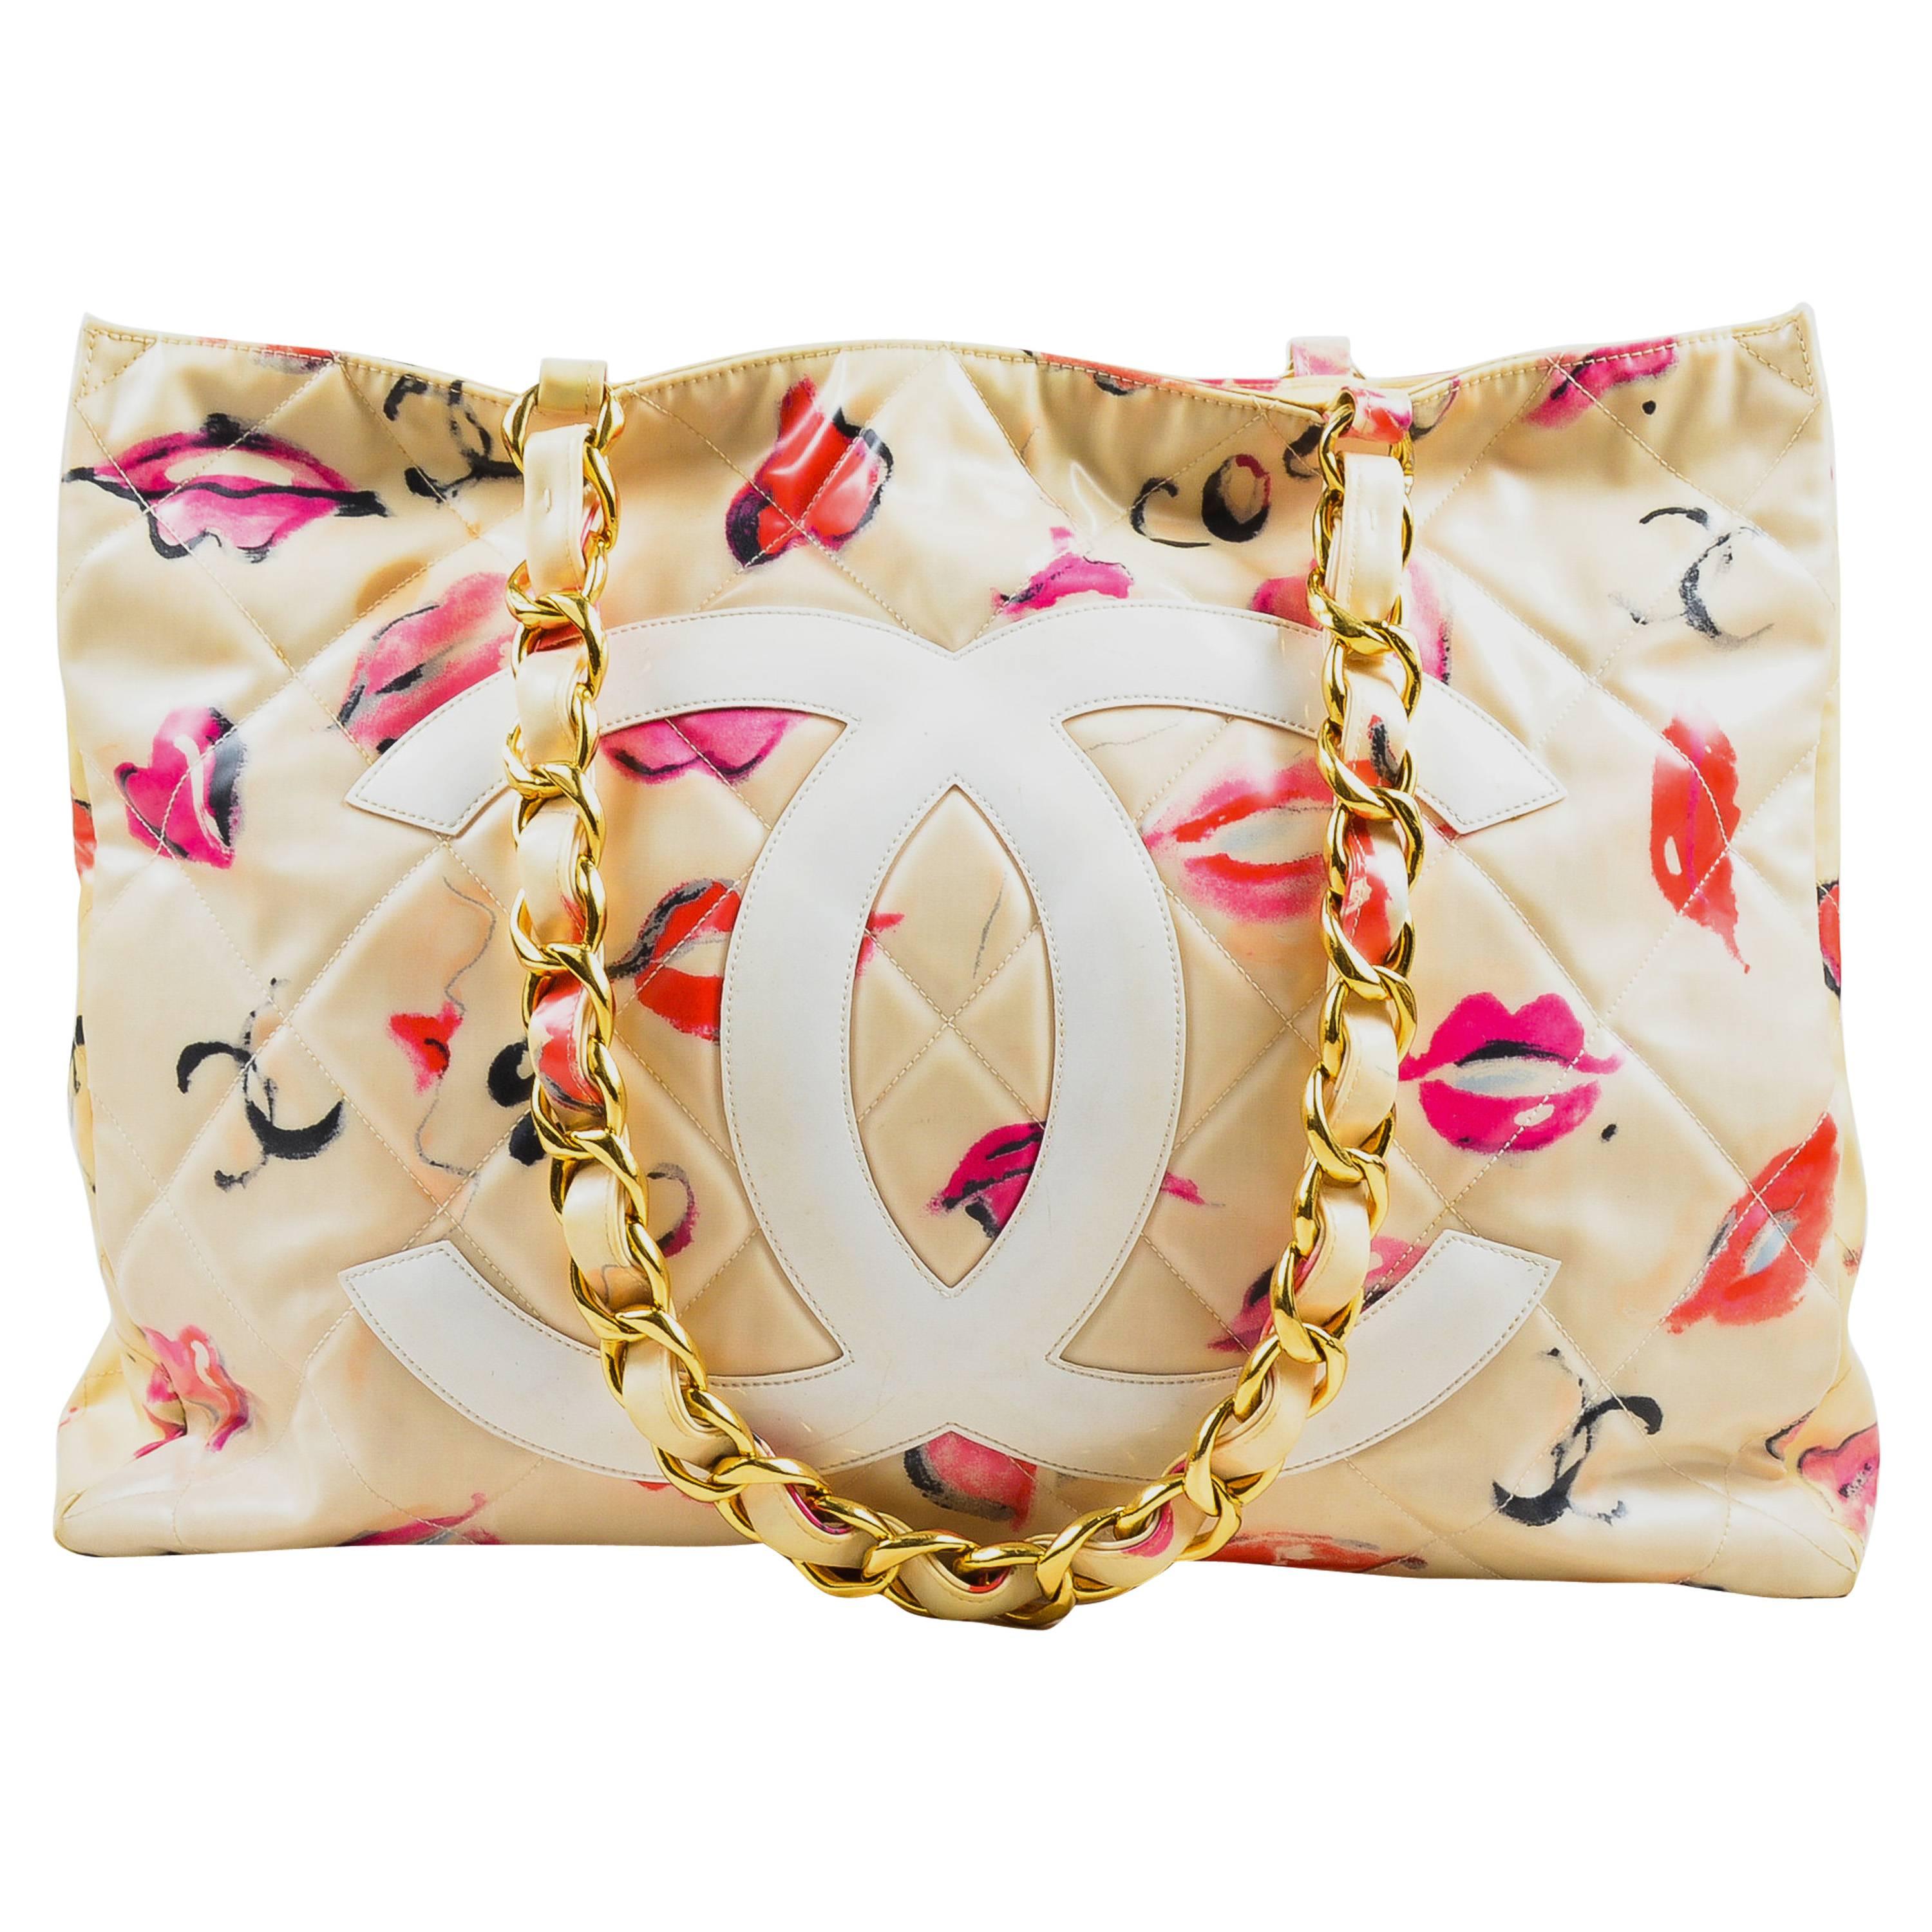 Vintage Chanel Cream Quilted Lip Print 'CC' Stitched Gold Hardware Chain Bag For Sale